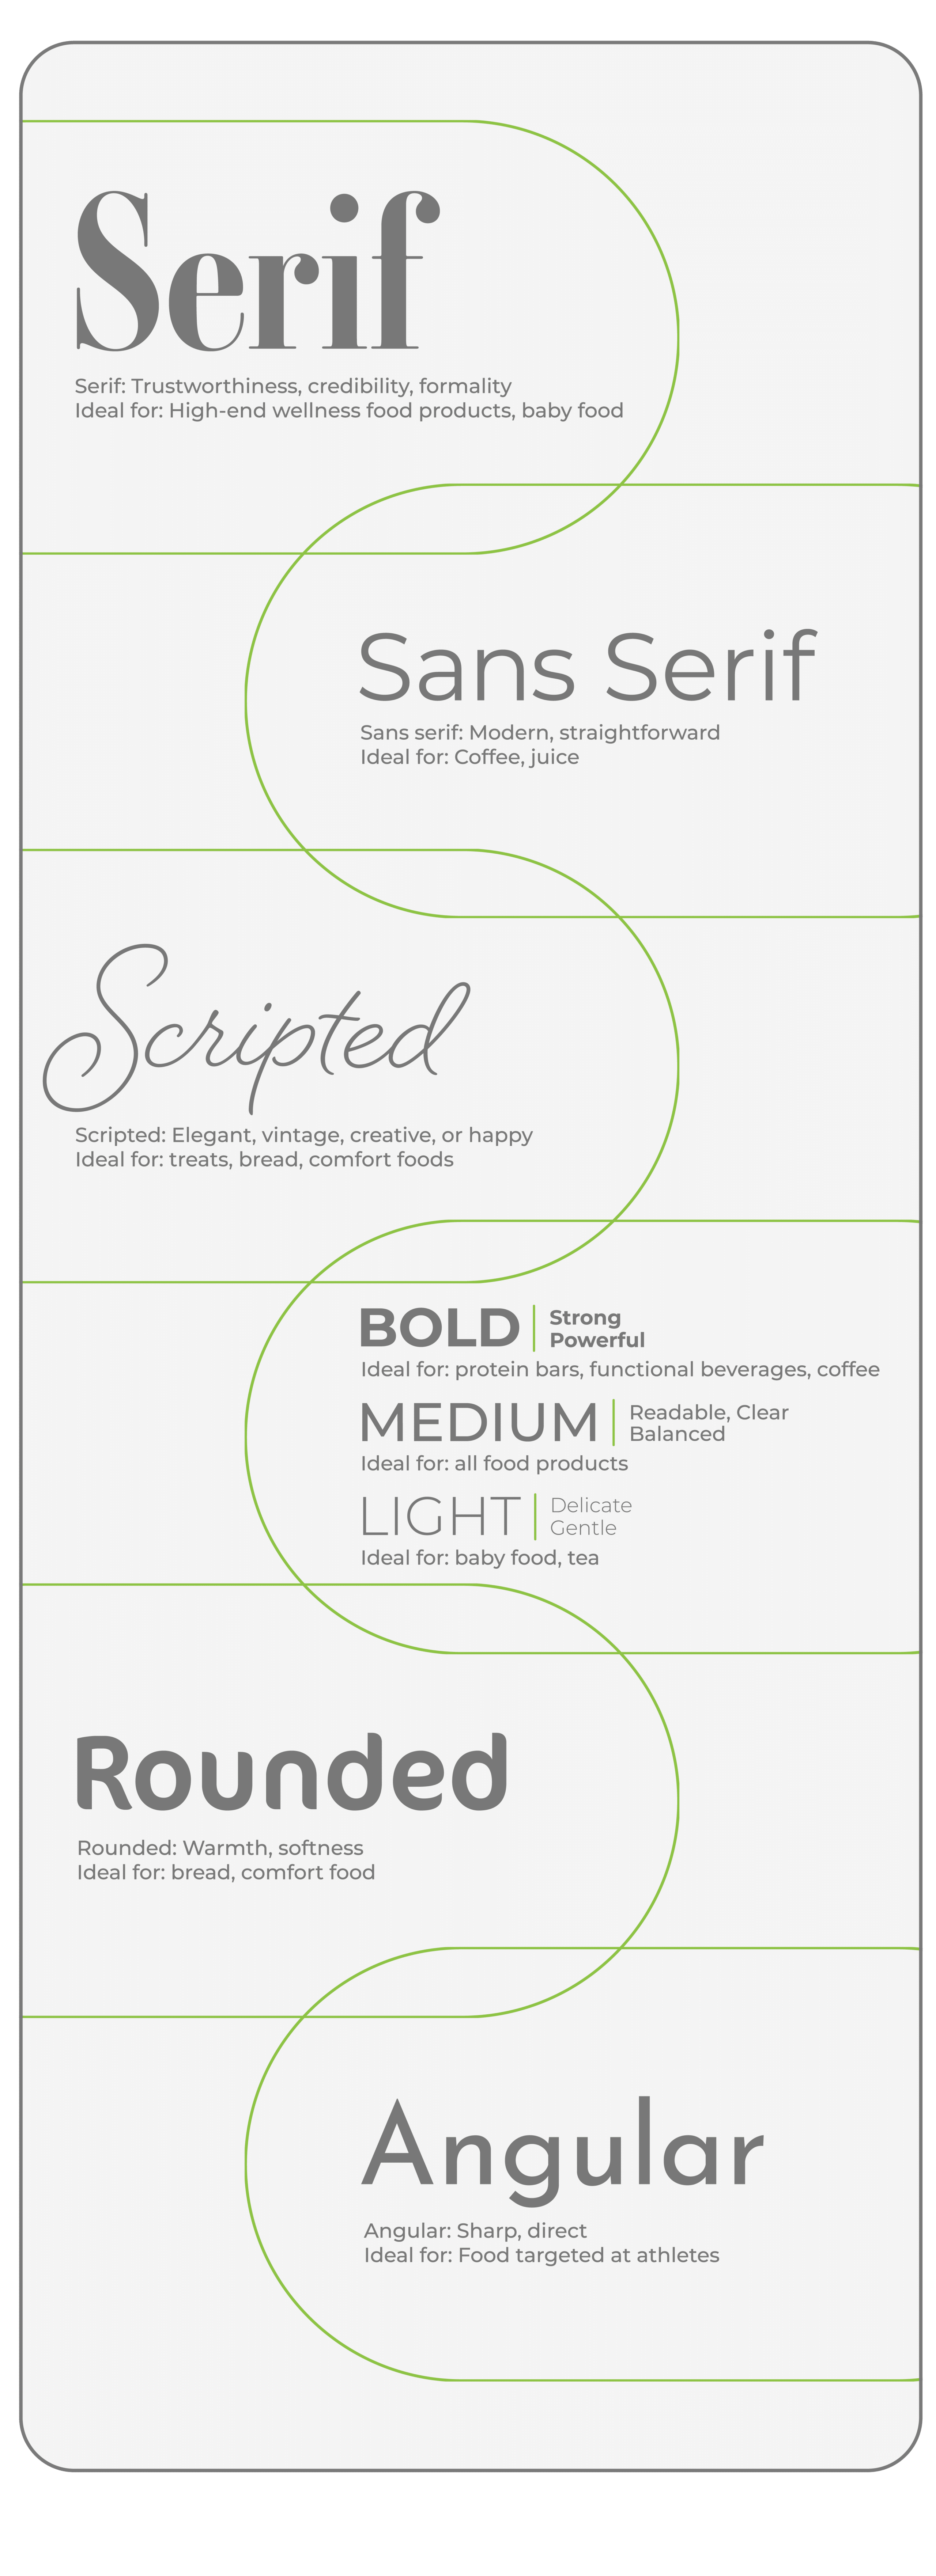 Infographic: Typography uses for food packaging: meanings for serif, sans serif, scripted, rounded, and angular fonts 